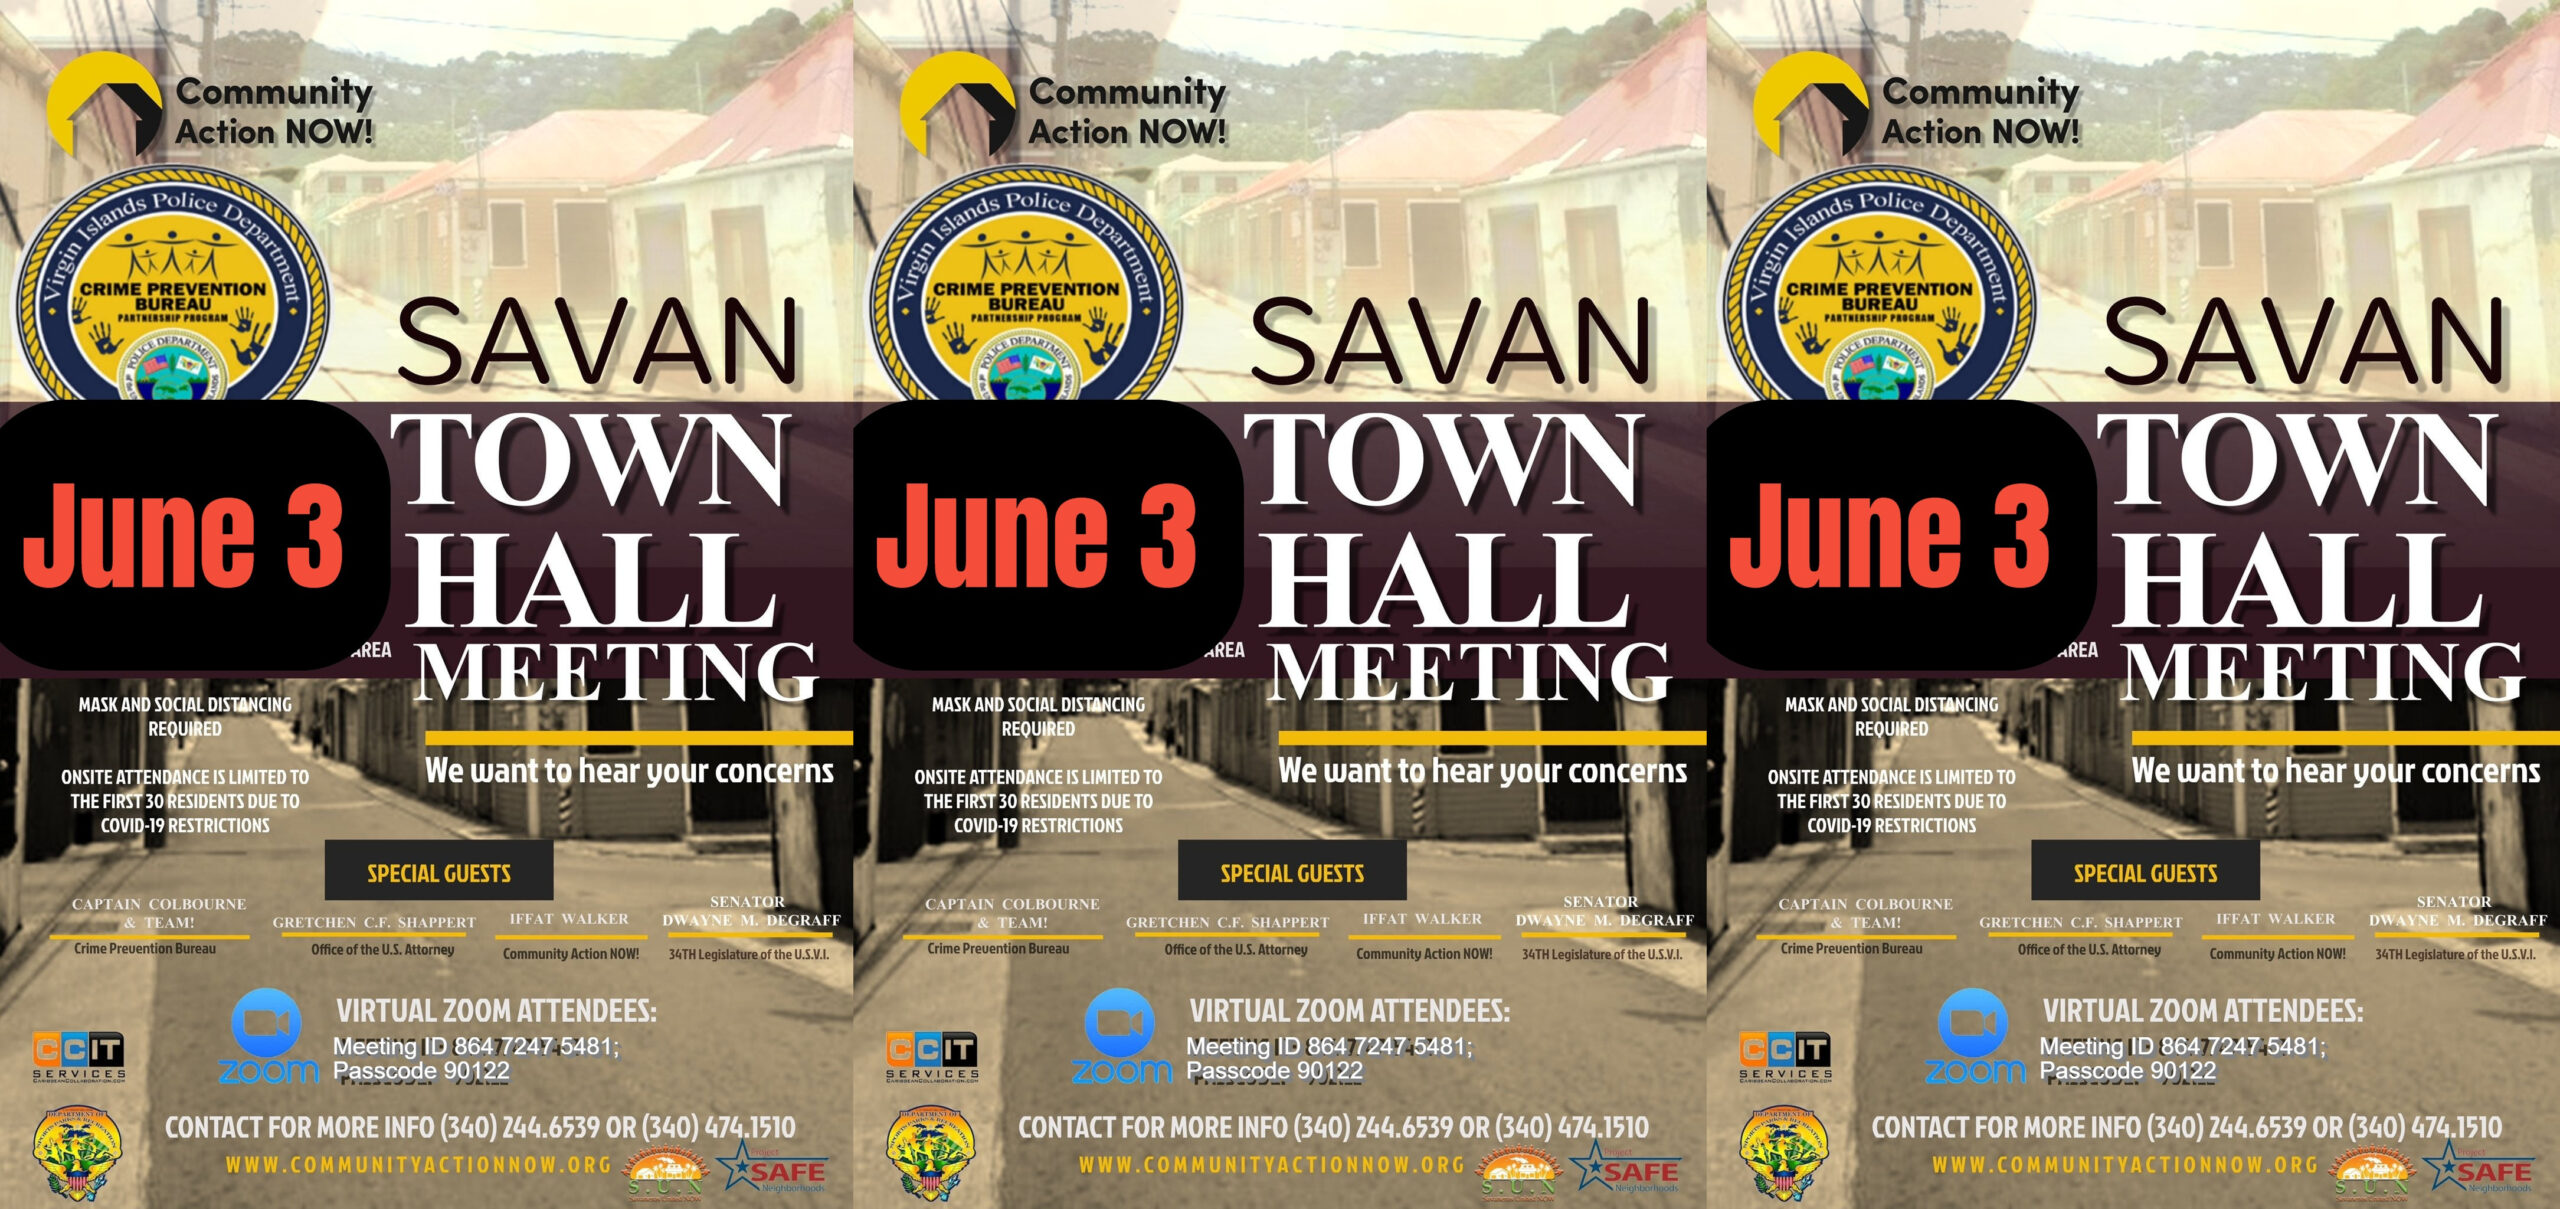 VIPD, USAO, Community Action NOW! and Senator To Set Town Hall Meeting In Savan